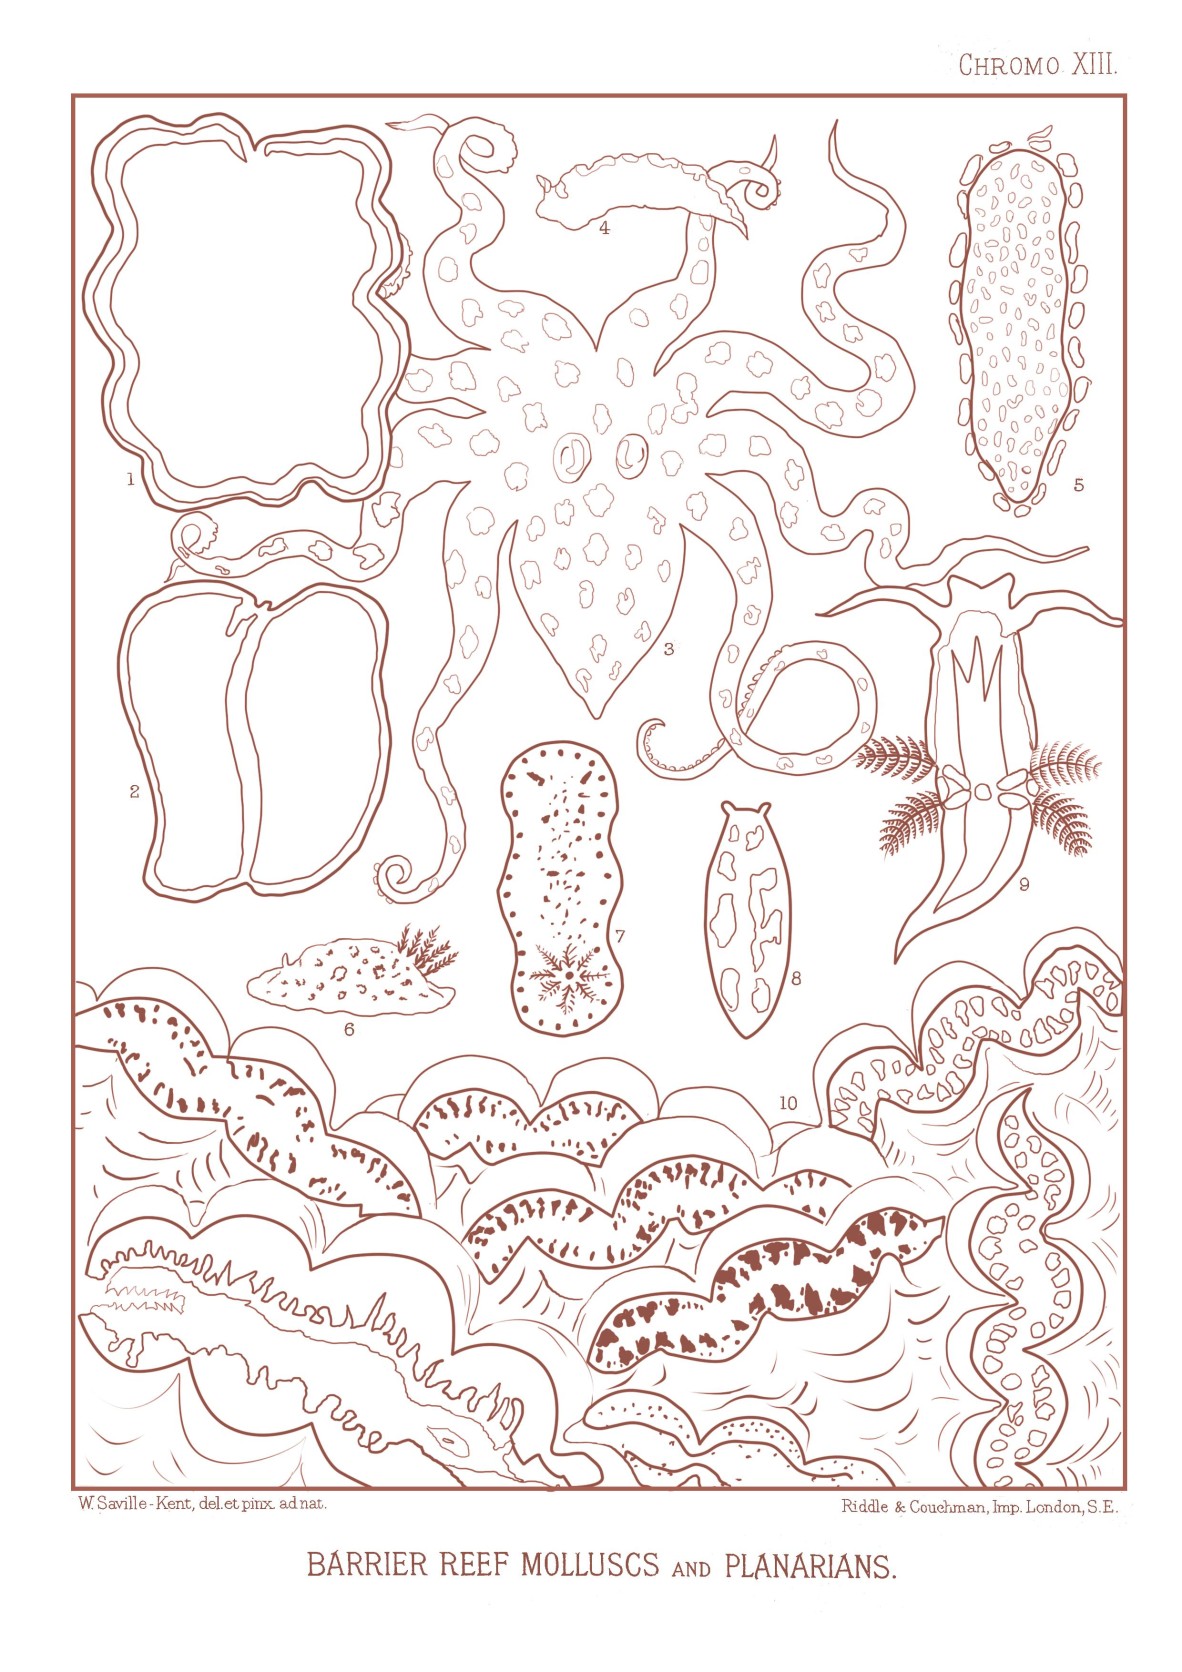 Drawing of Great Barrier Reef Molluscs and Planarians